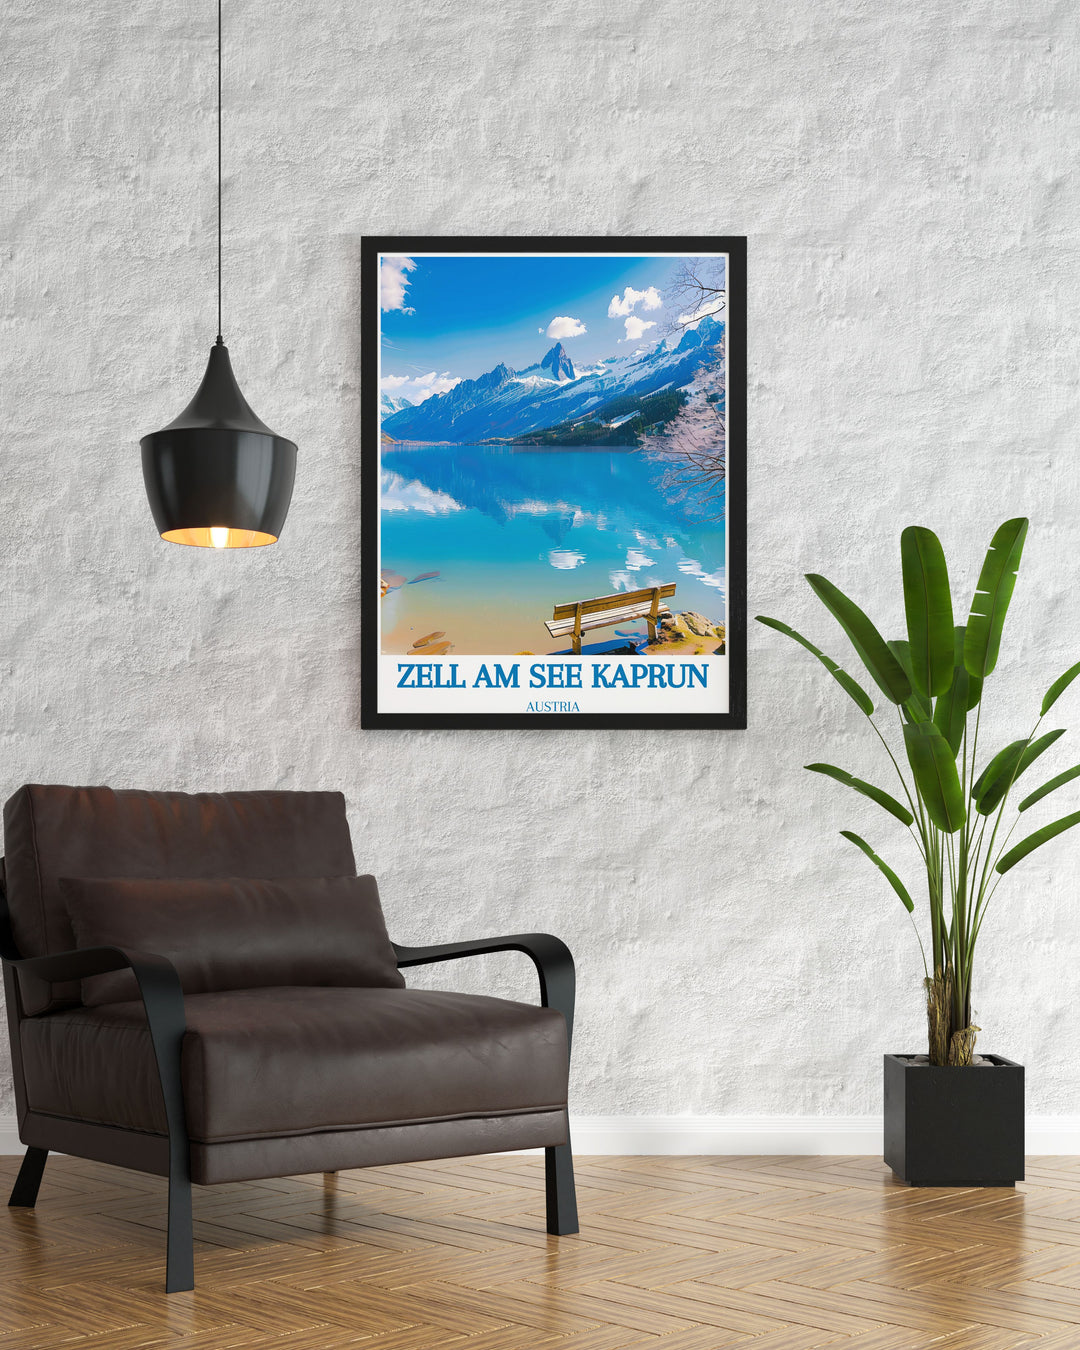 Beautiful canvas art of Zell am See, Austria. This artwork captures the picturesque landscapes, including the snow covered mountains, pristine lake, and vibrant village, bringing the enchanting beauty of the Austrian Alps into your home decor. The vivid colors and fine details make this piece a perfect addition to any art collection, celebrating the scenic charm of Zell am See.